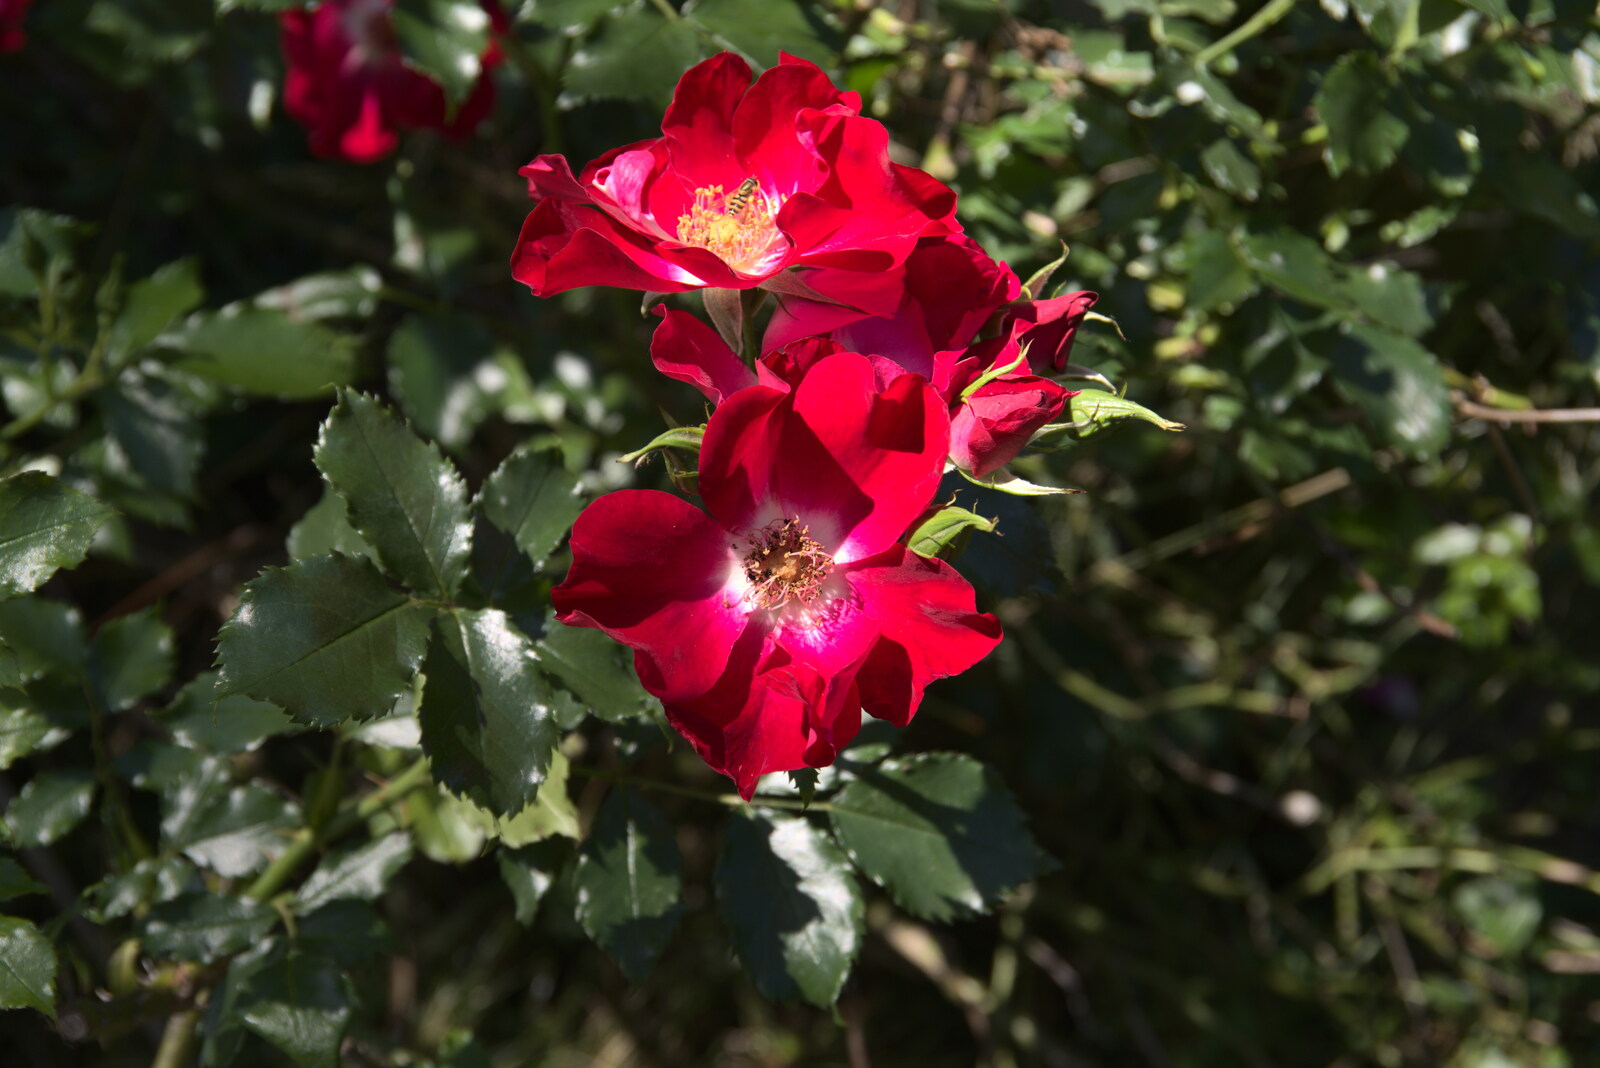 Some nice red flowers from A Walk Around Abbey Bridges, Eye, Suffolk - 5th July 2020